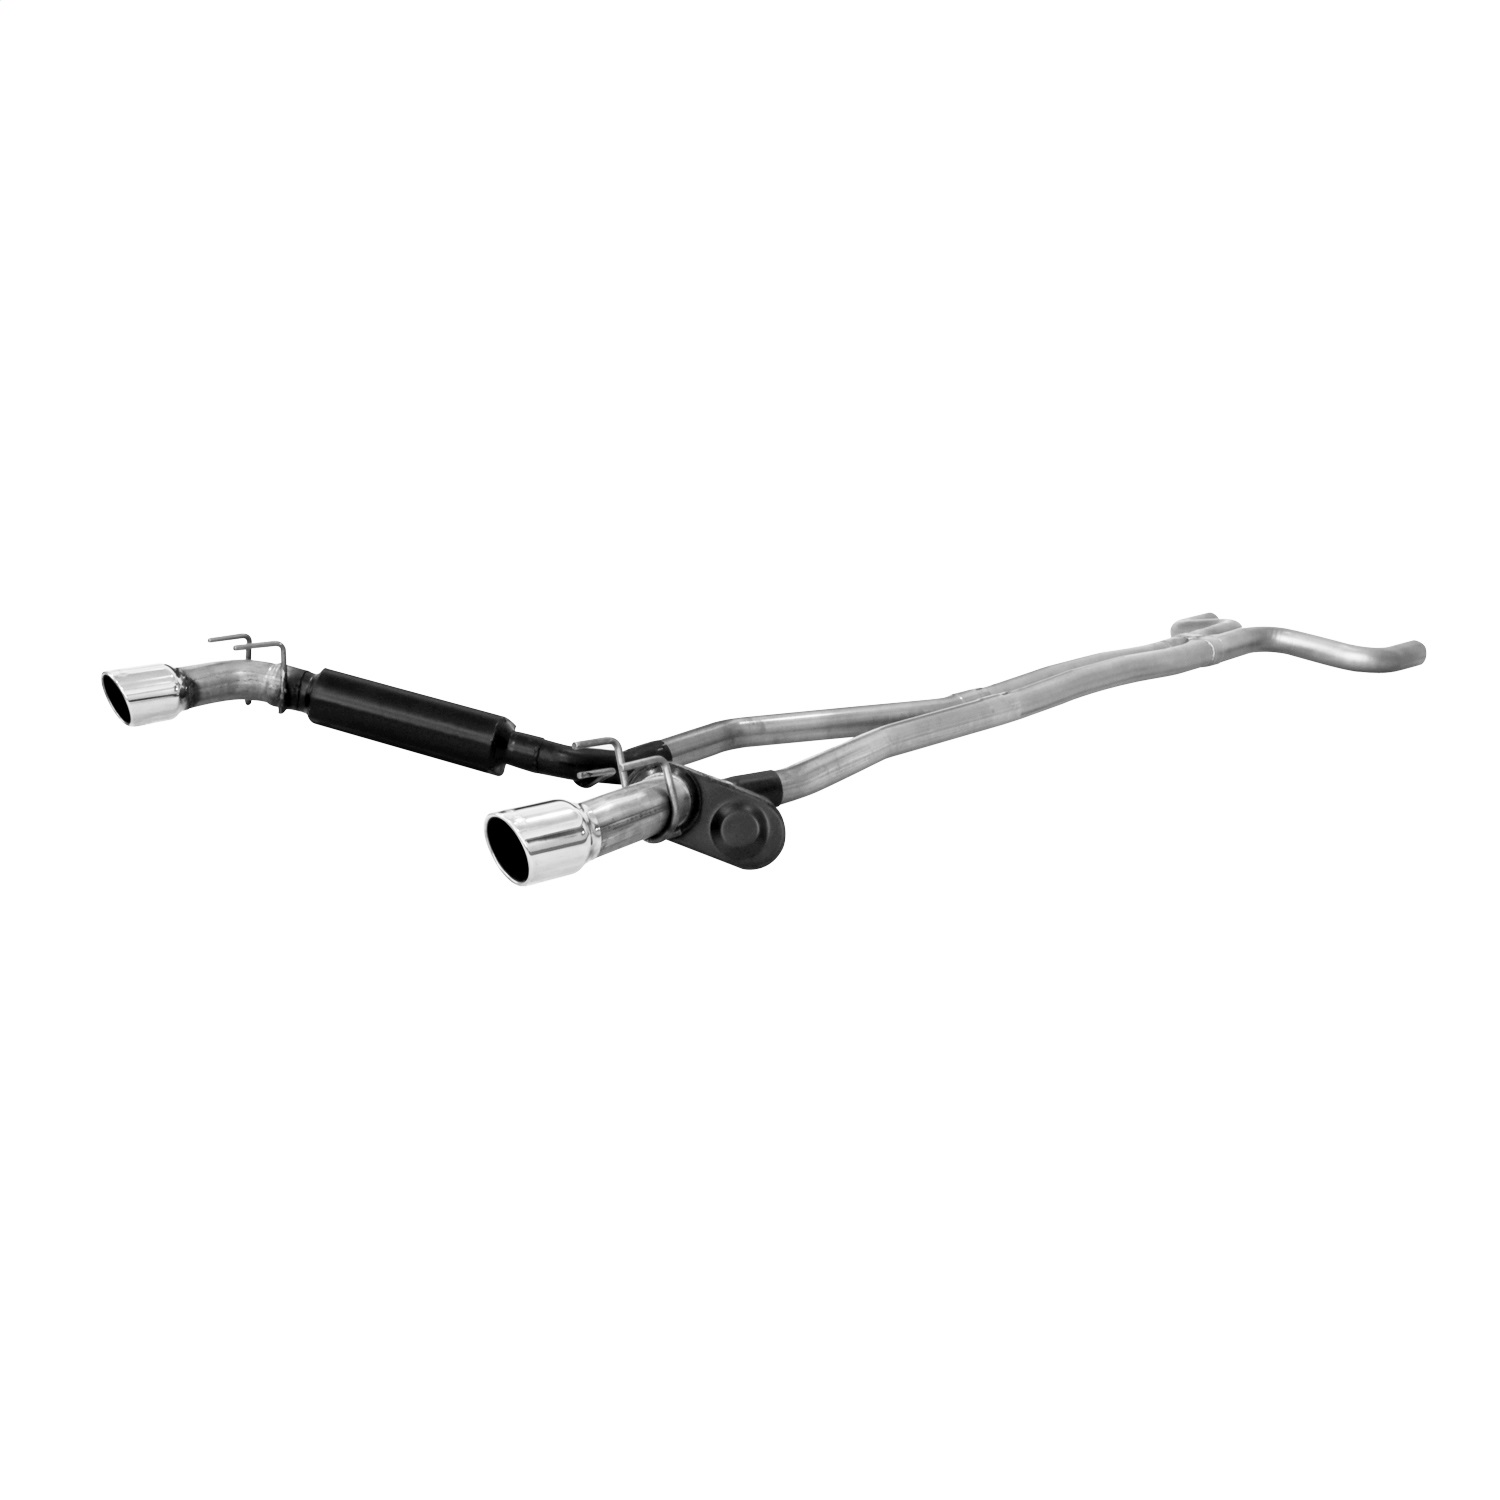 Flowmaster Flowmaster 817572 American Thunder Cat Back Exhaust System Fits 10-13 Camaro